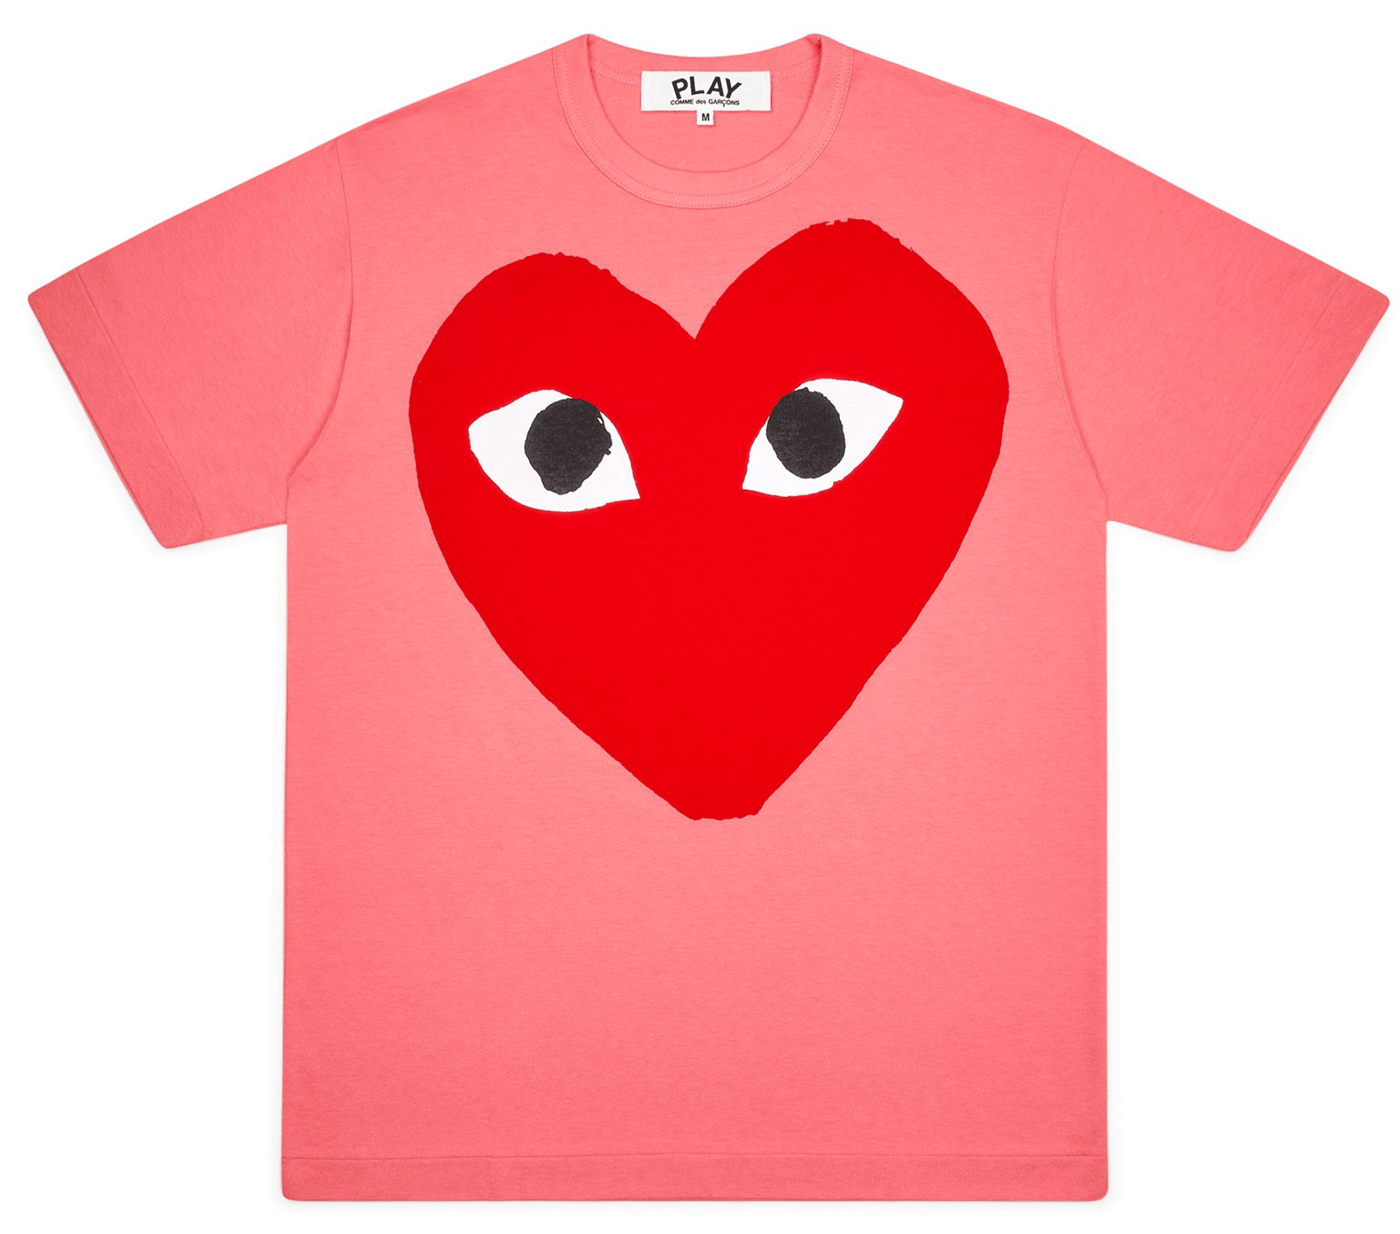 Comme-des-Garcons-Play-Short-Sleeve-Women-Tee-Pink-1